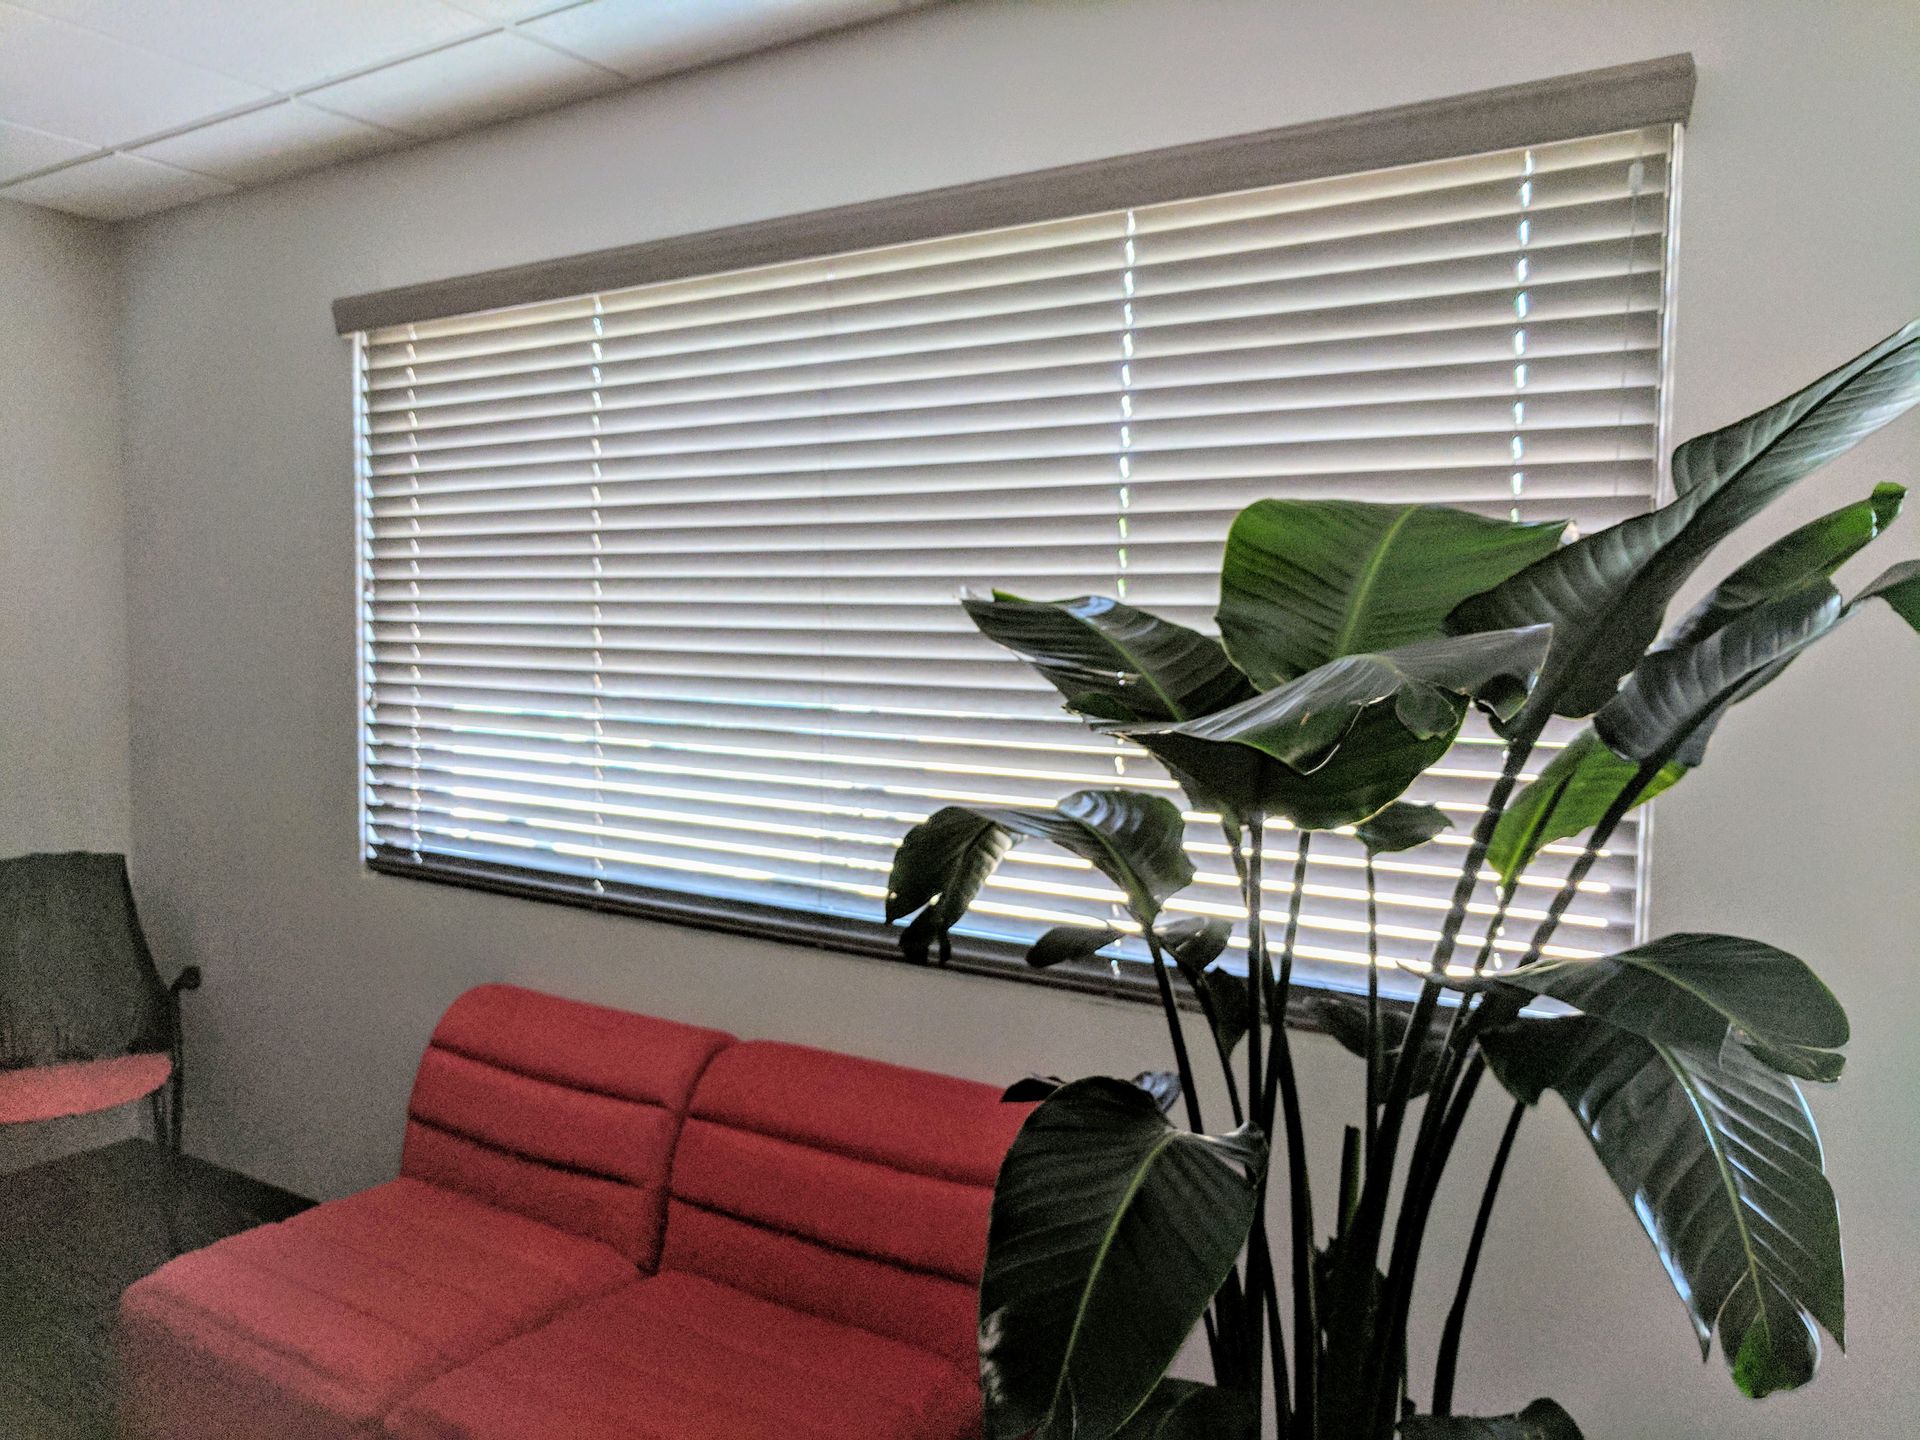 A waiting room with a red couch and a plant in front of a window with blinds.